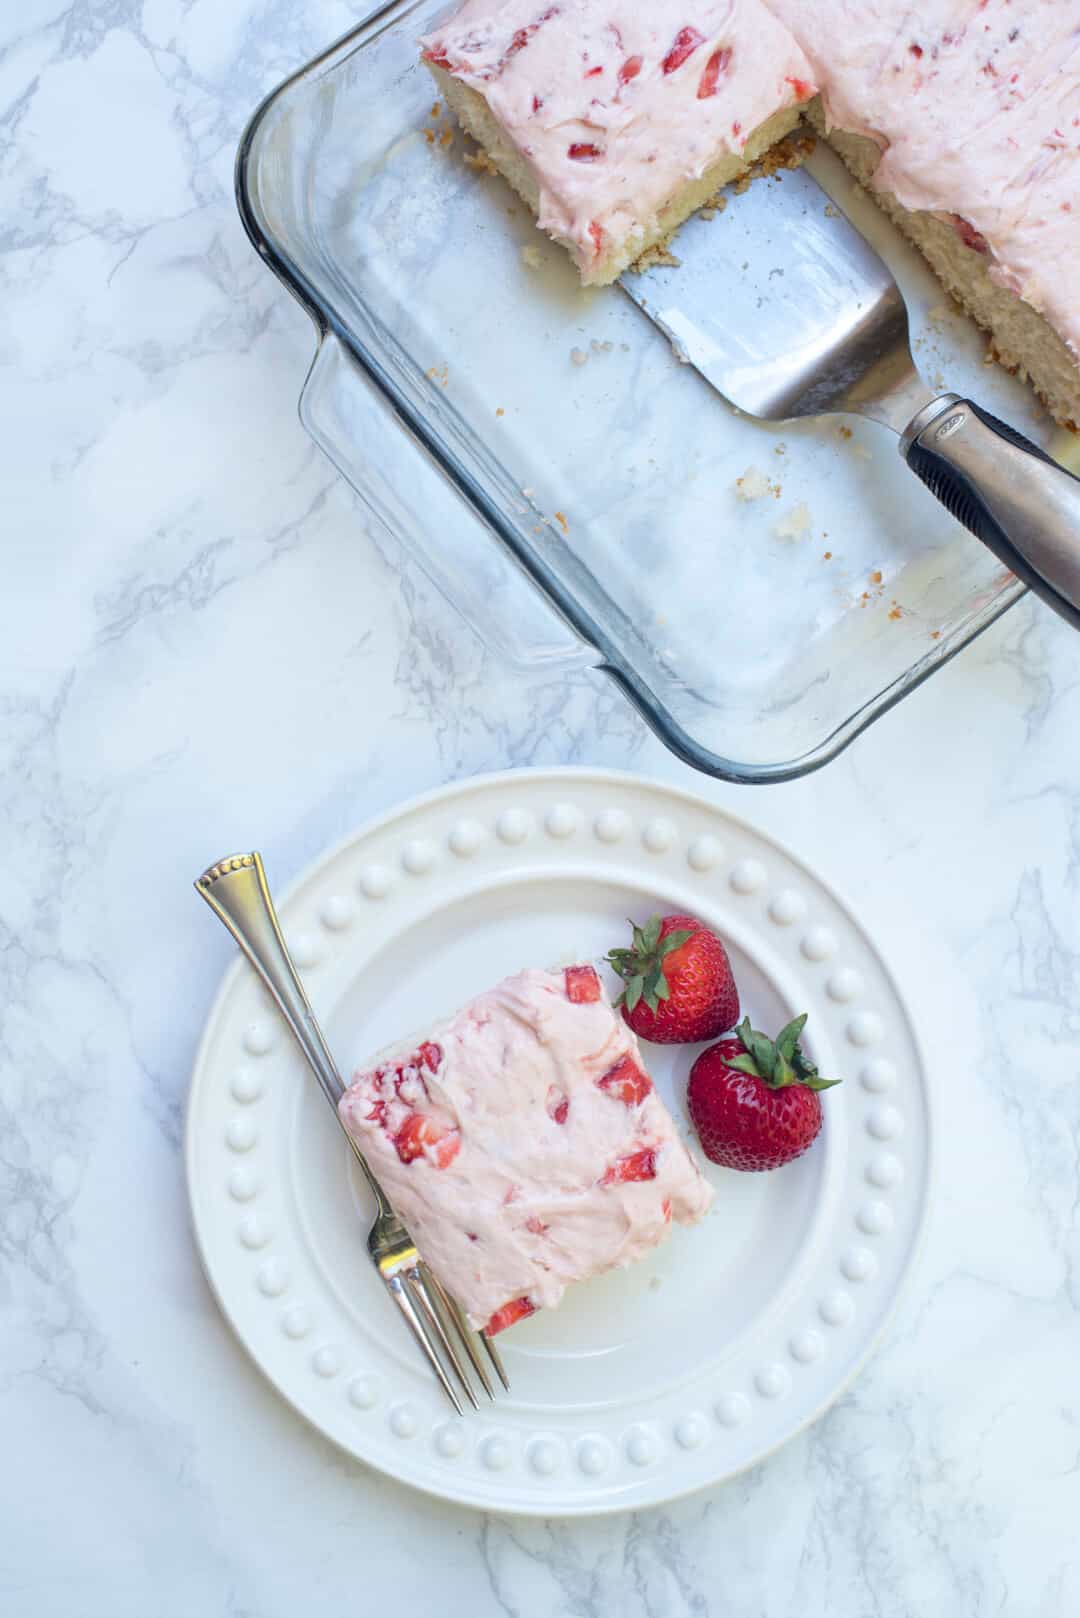 A slice of the cake on a white plate with strawberries and fork shot from over the top.